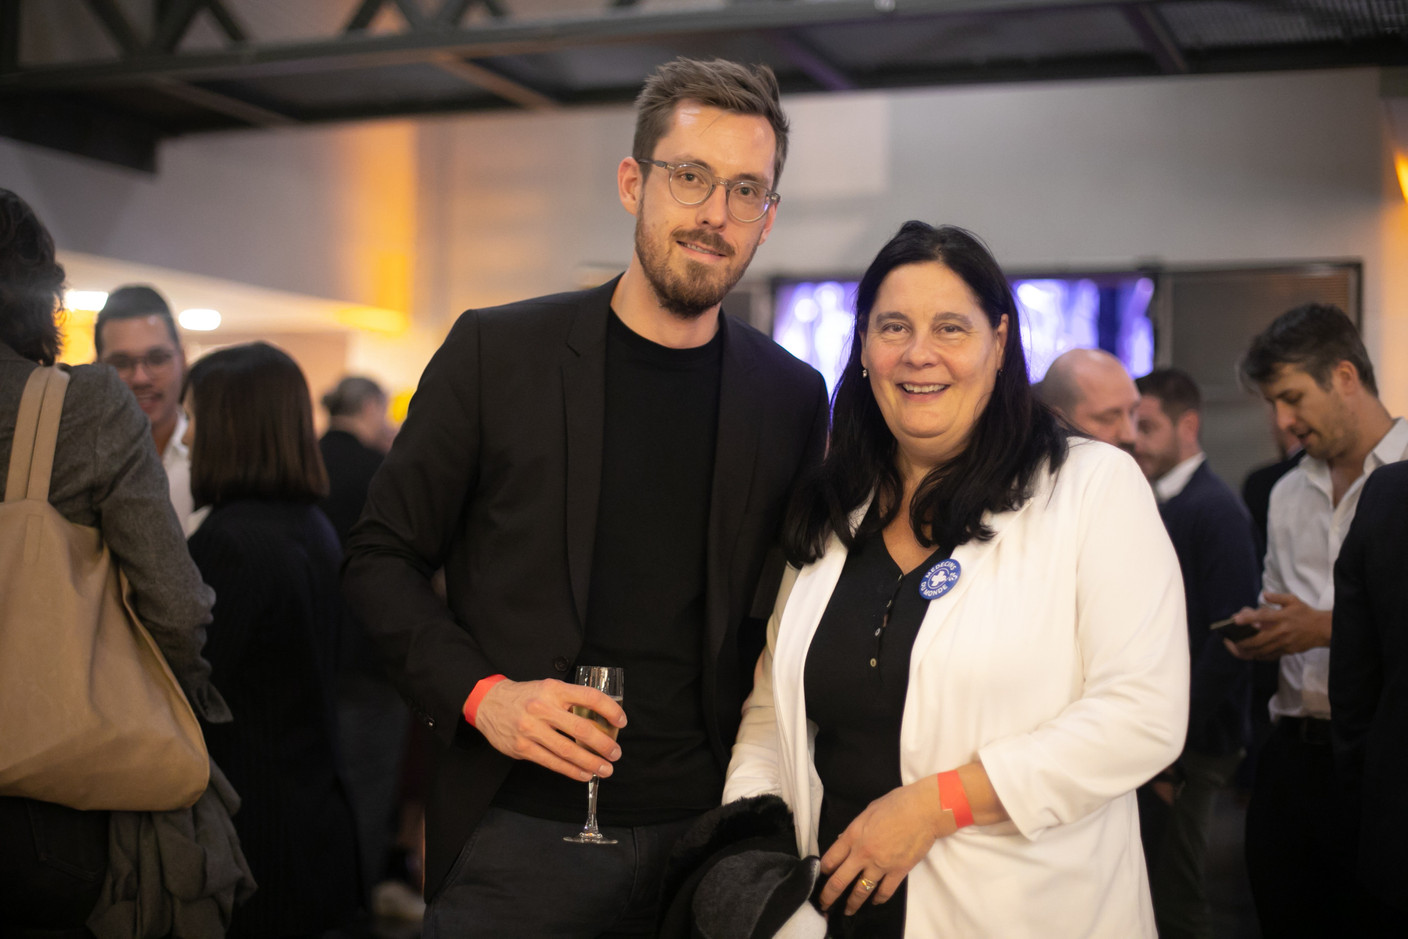 The gala evening of this event, which replaces the Media Awards and is renamed in honour of Leo Reuter, took place on Thursday evening at the Tramsschapp in Luxembourg. (Photo: Matic Zorman/Maison Moderne)